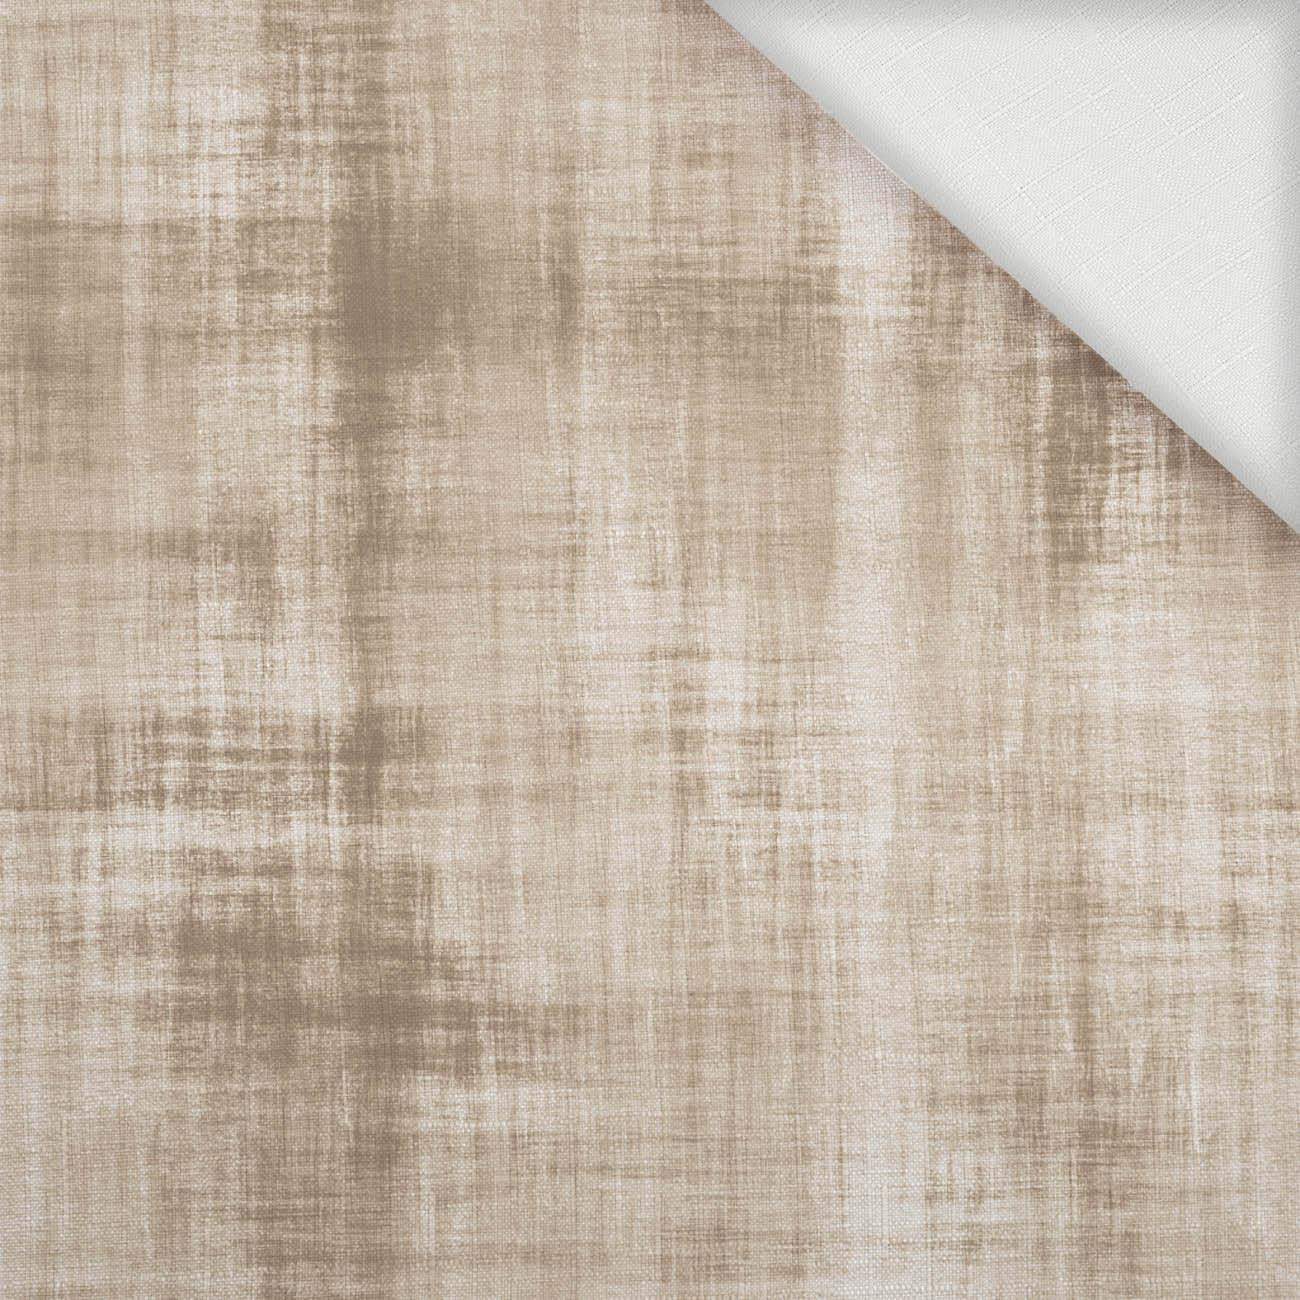 ACID WASH PAT. 2 (beige) - Woven Fabric for tablecloths